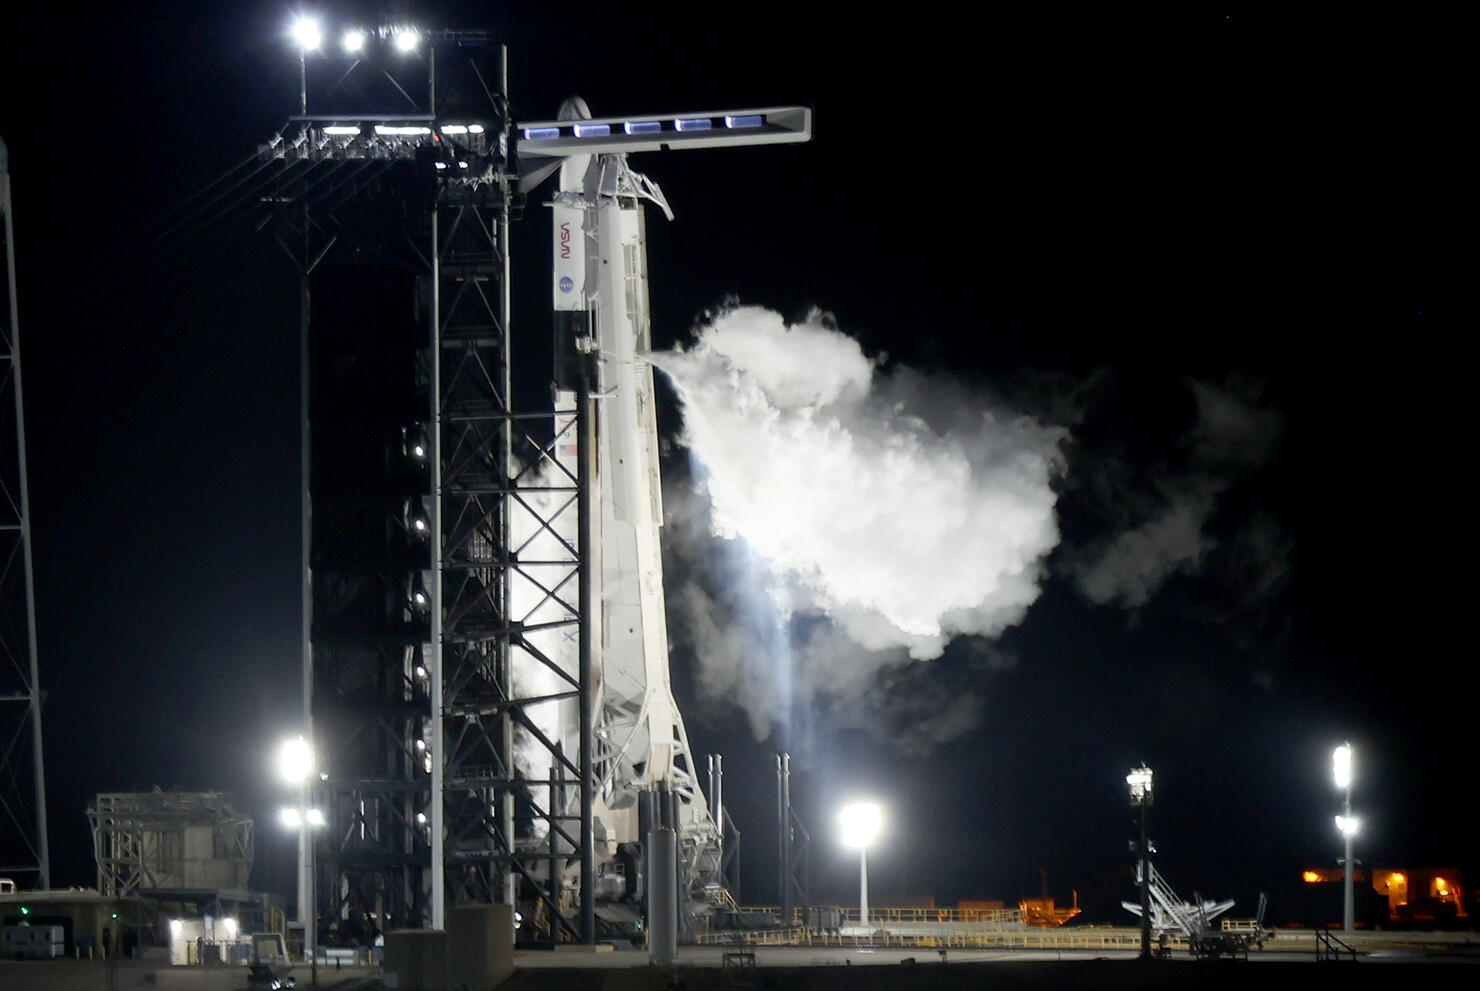 NASA And SpaceX Prepare To Launch Crew-6 Mission To International Space Station